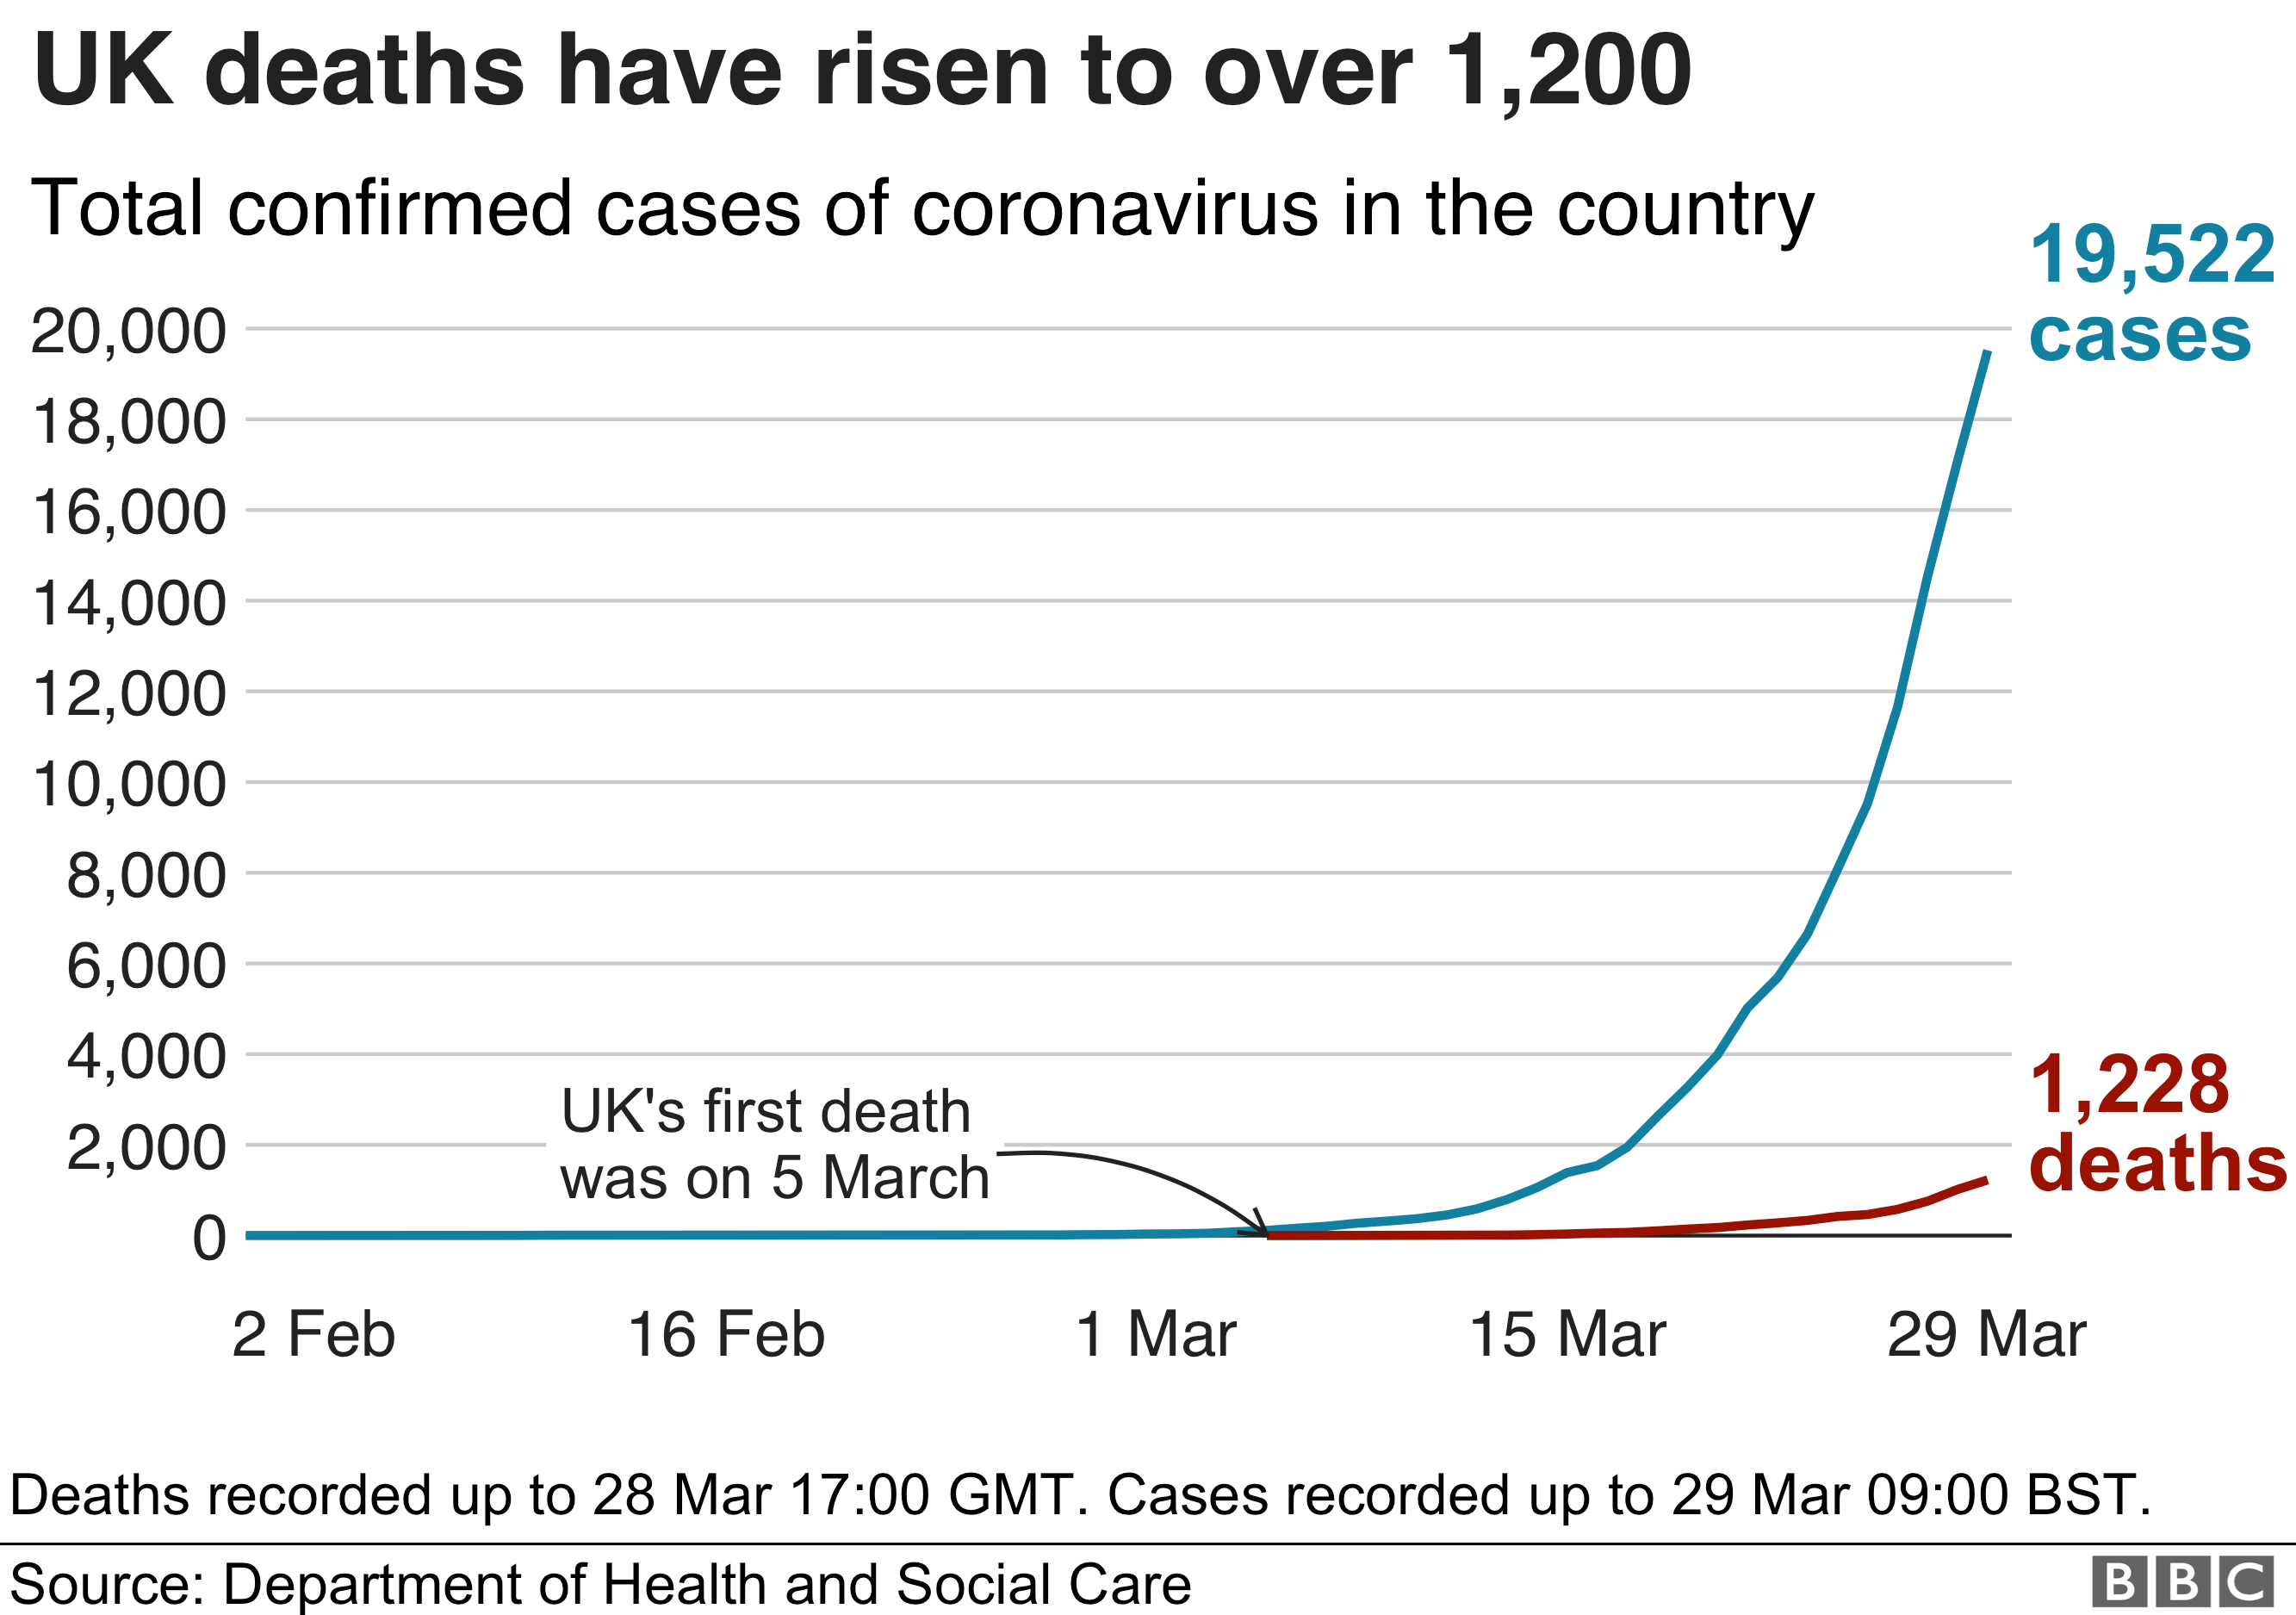 Chart showing the number of deaths in the UK